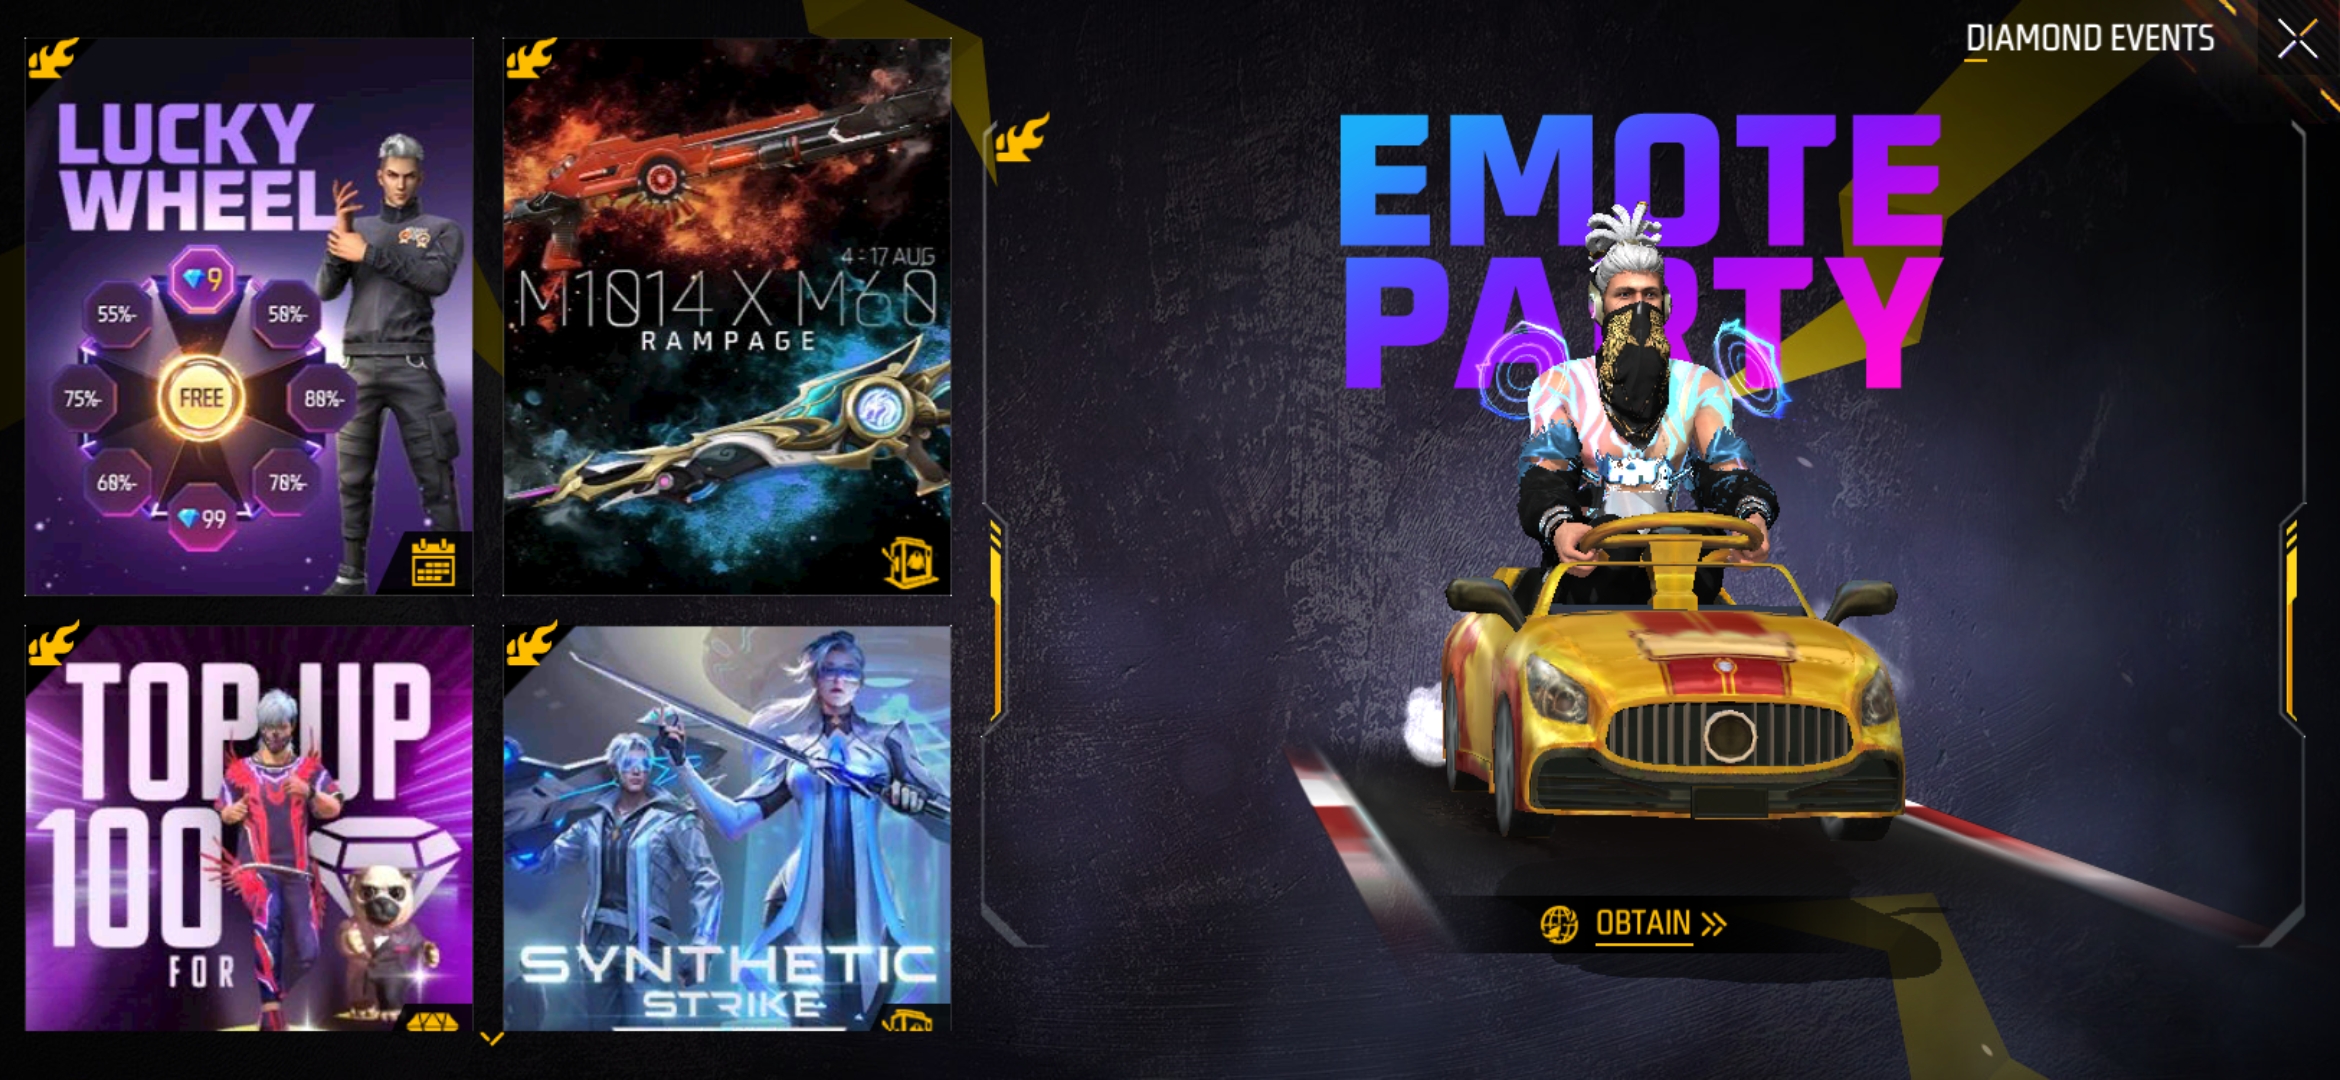 New Event In Free Fire Max: The Emote Party